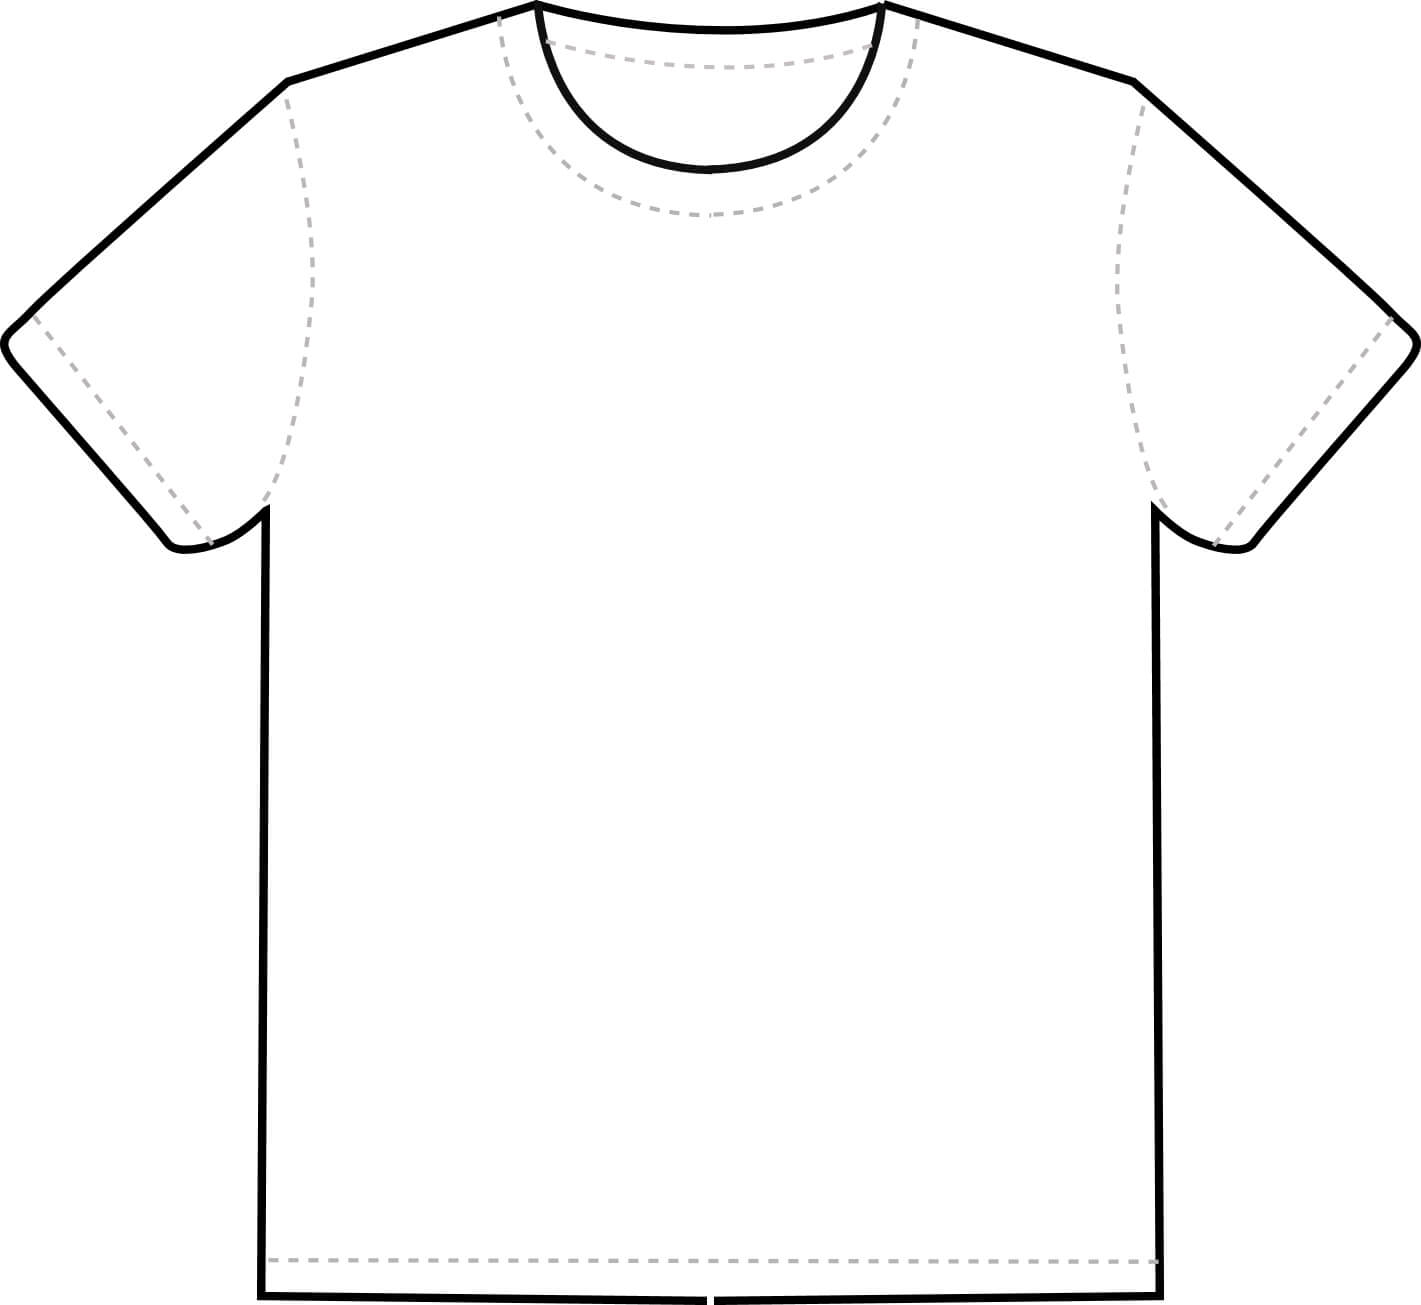 Free T Shirt Template Printable, Download Free Clip Art Throughout Blank Tee Shirt Template